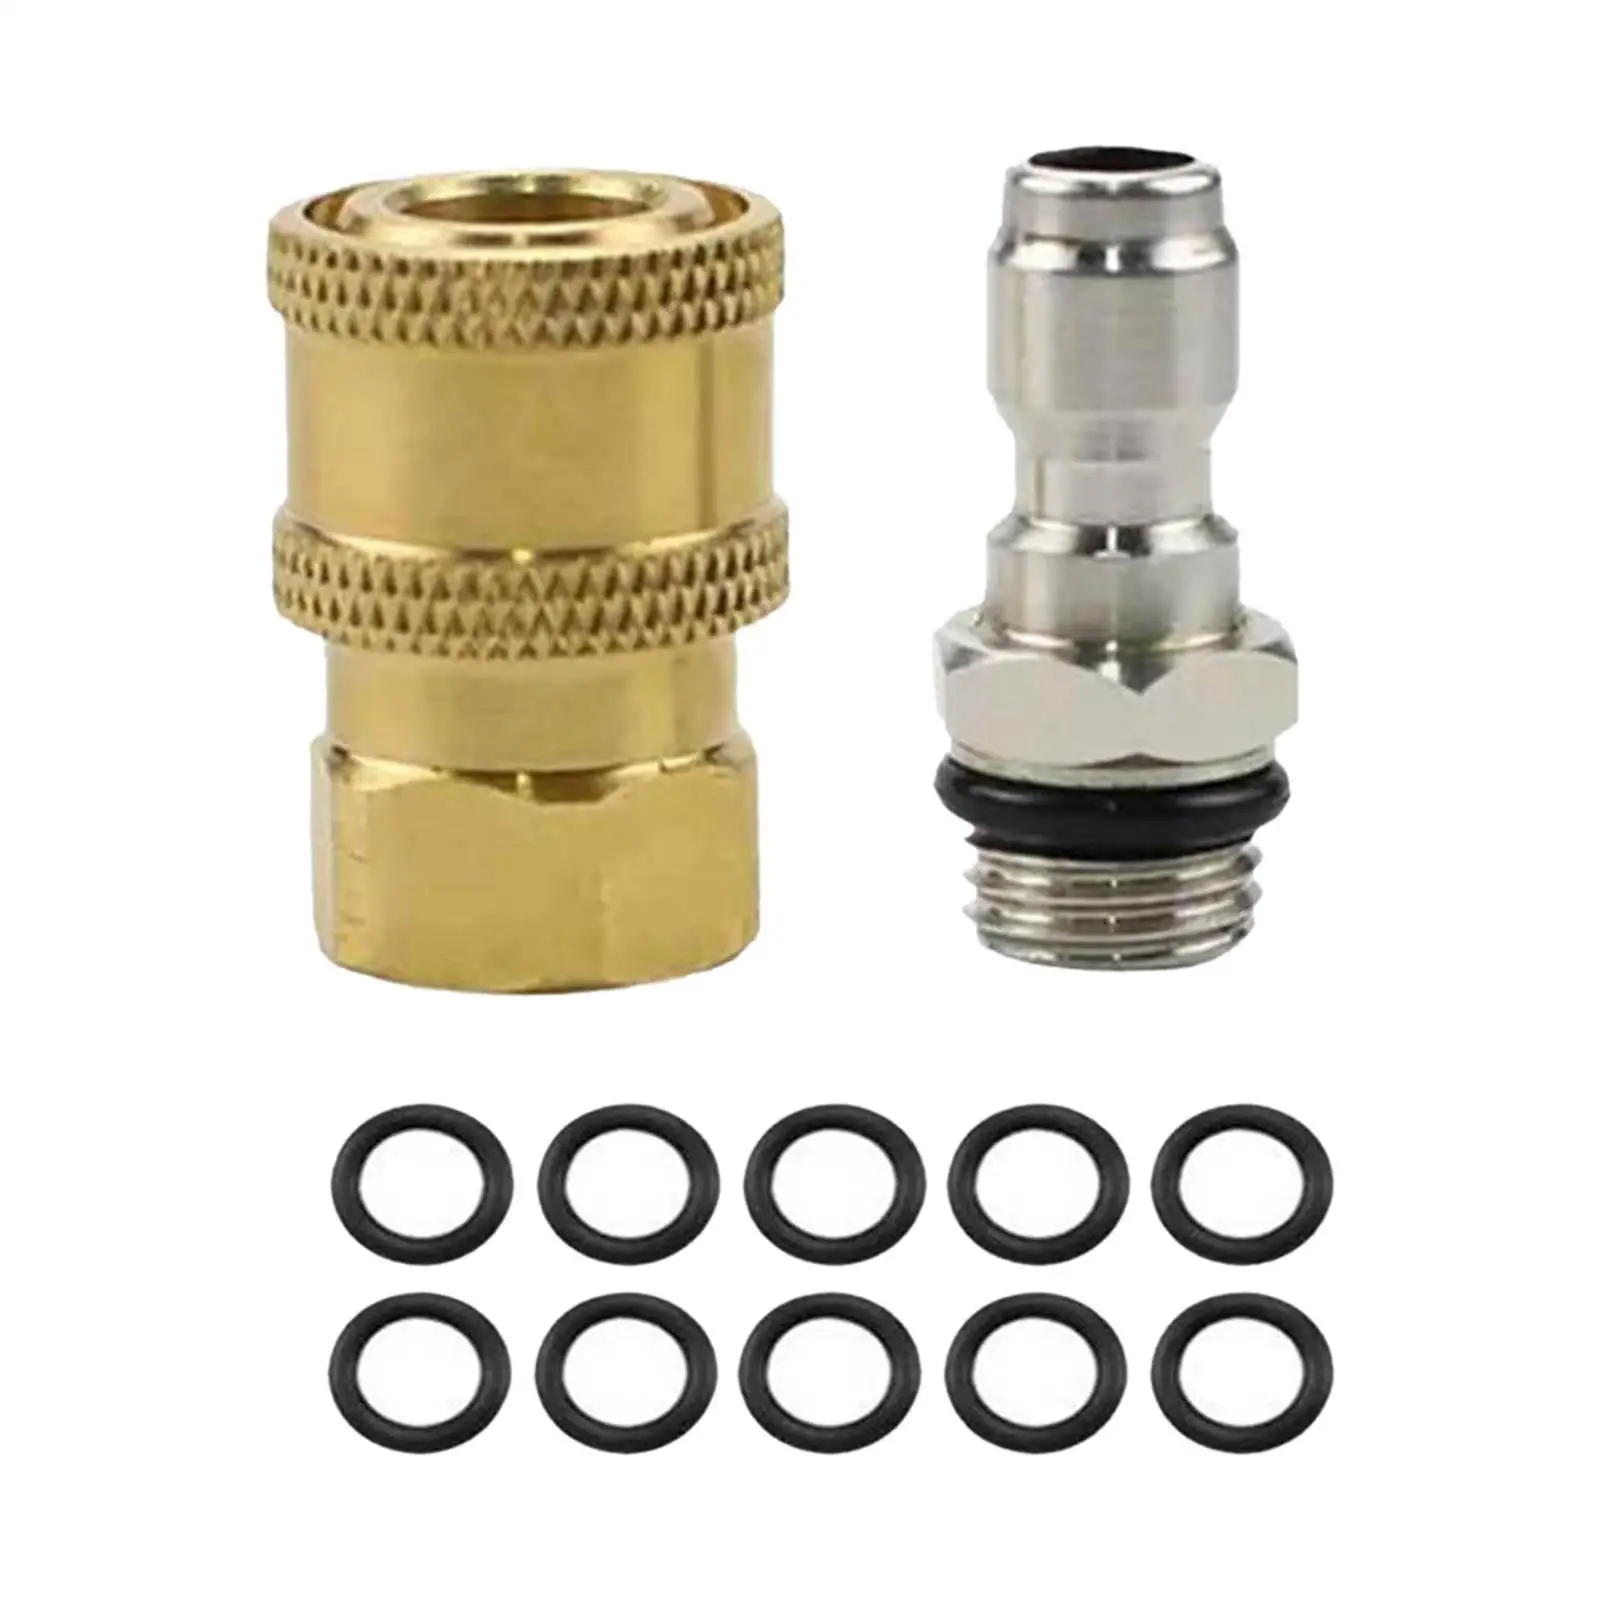 Pressure Washer Adapter Set,1/4 Inch Quick Disconnect Kit With 10 Pack O Ring.5000 Psi